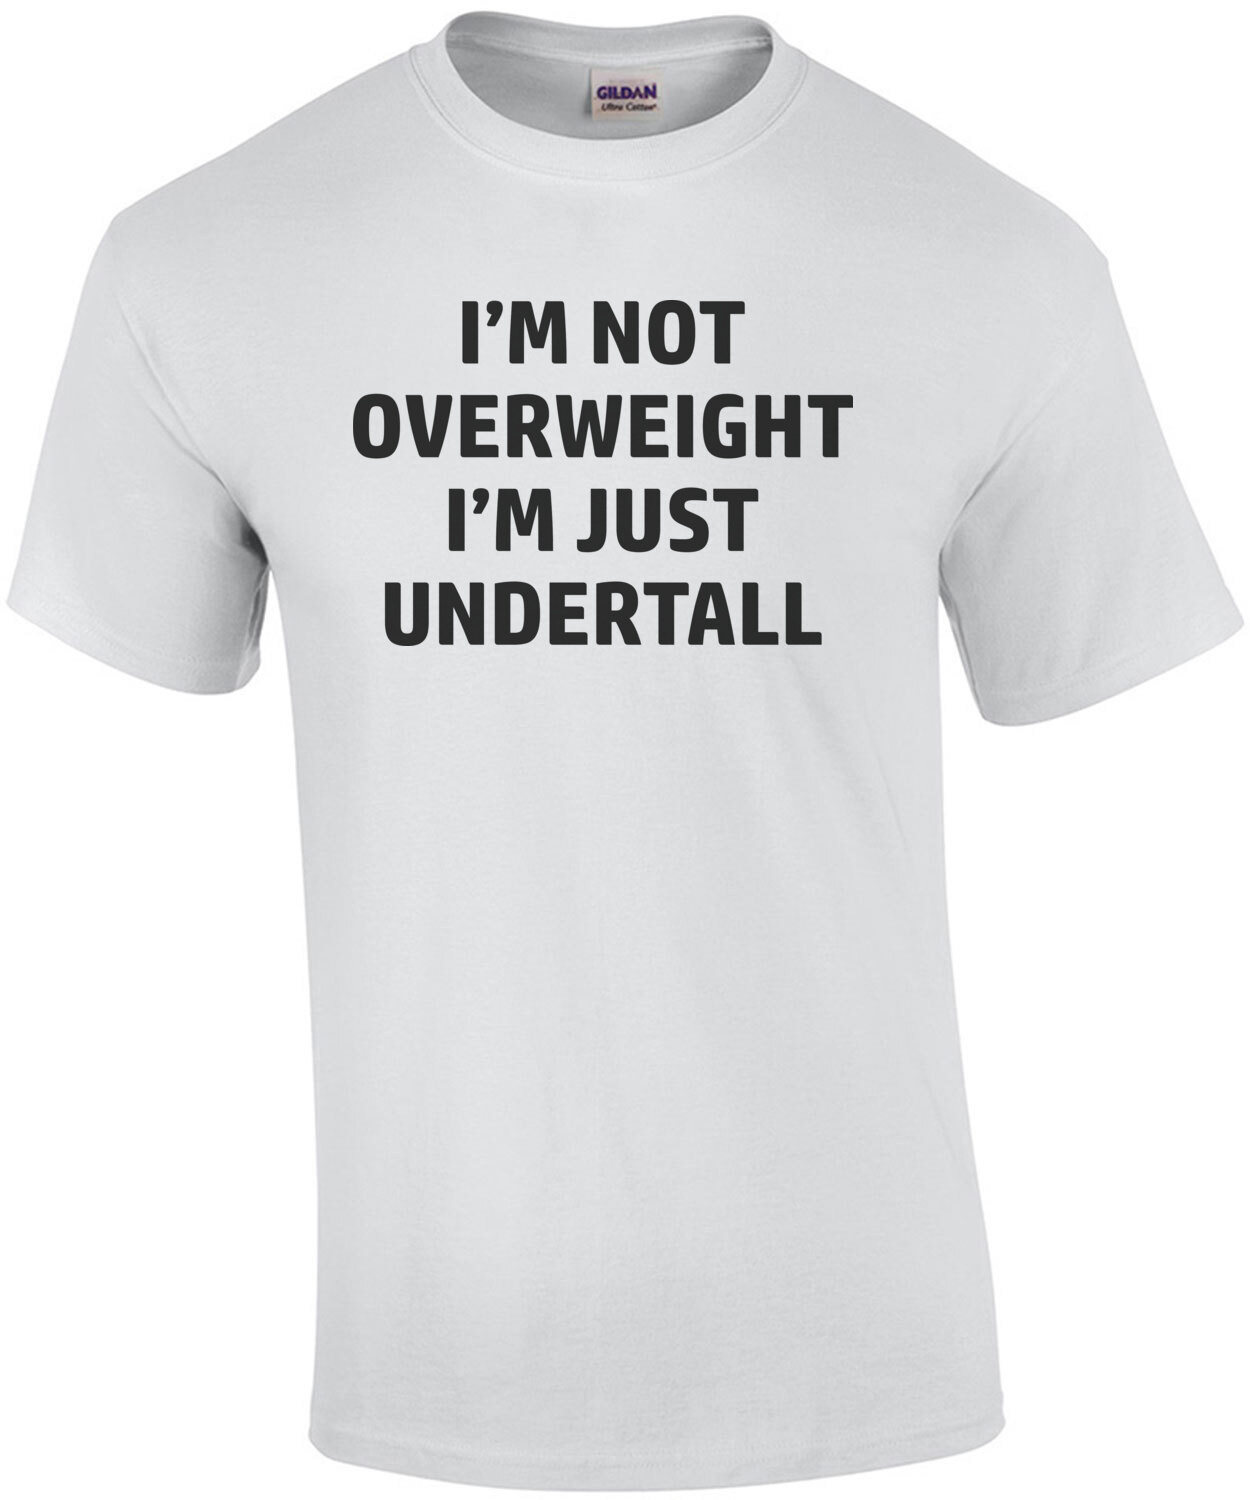 I'm not overweight I'm just undertall - funny fat guy t-shirt